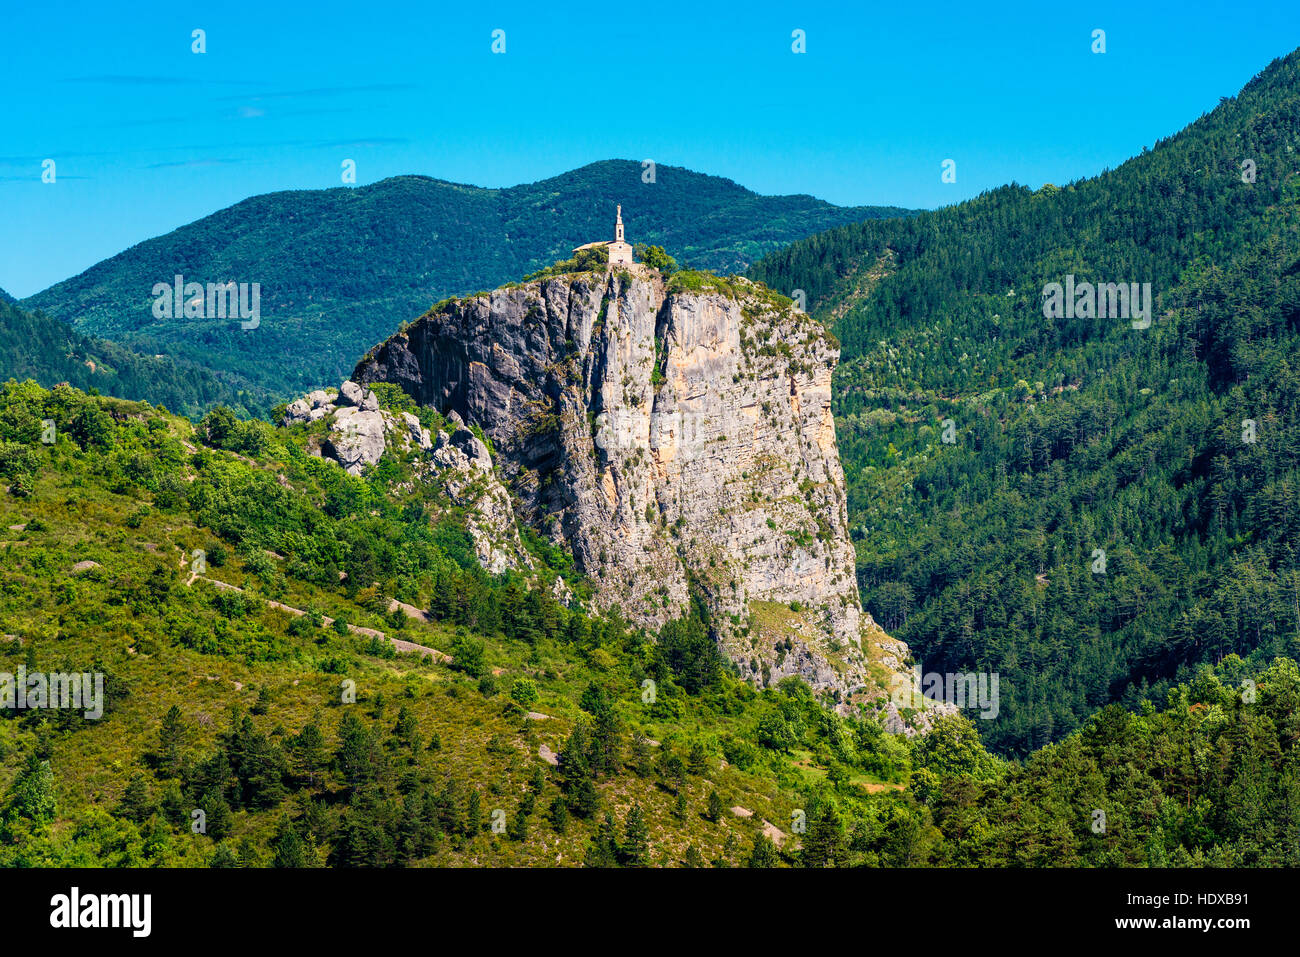 Church on Giant Rock in Castellane Southern France Stock Photo